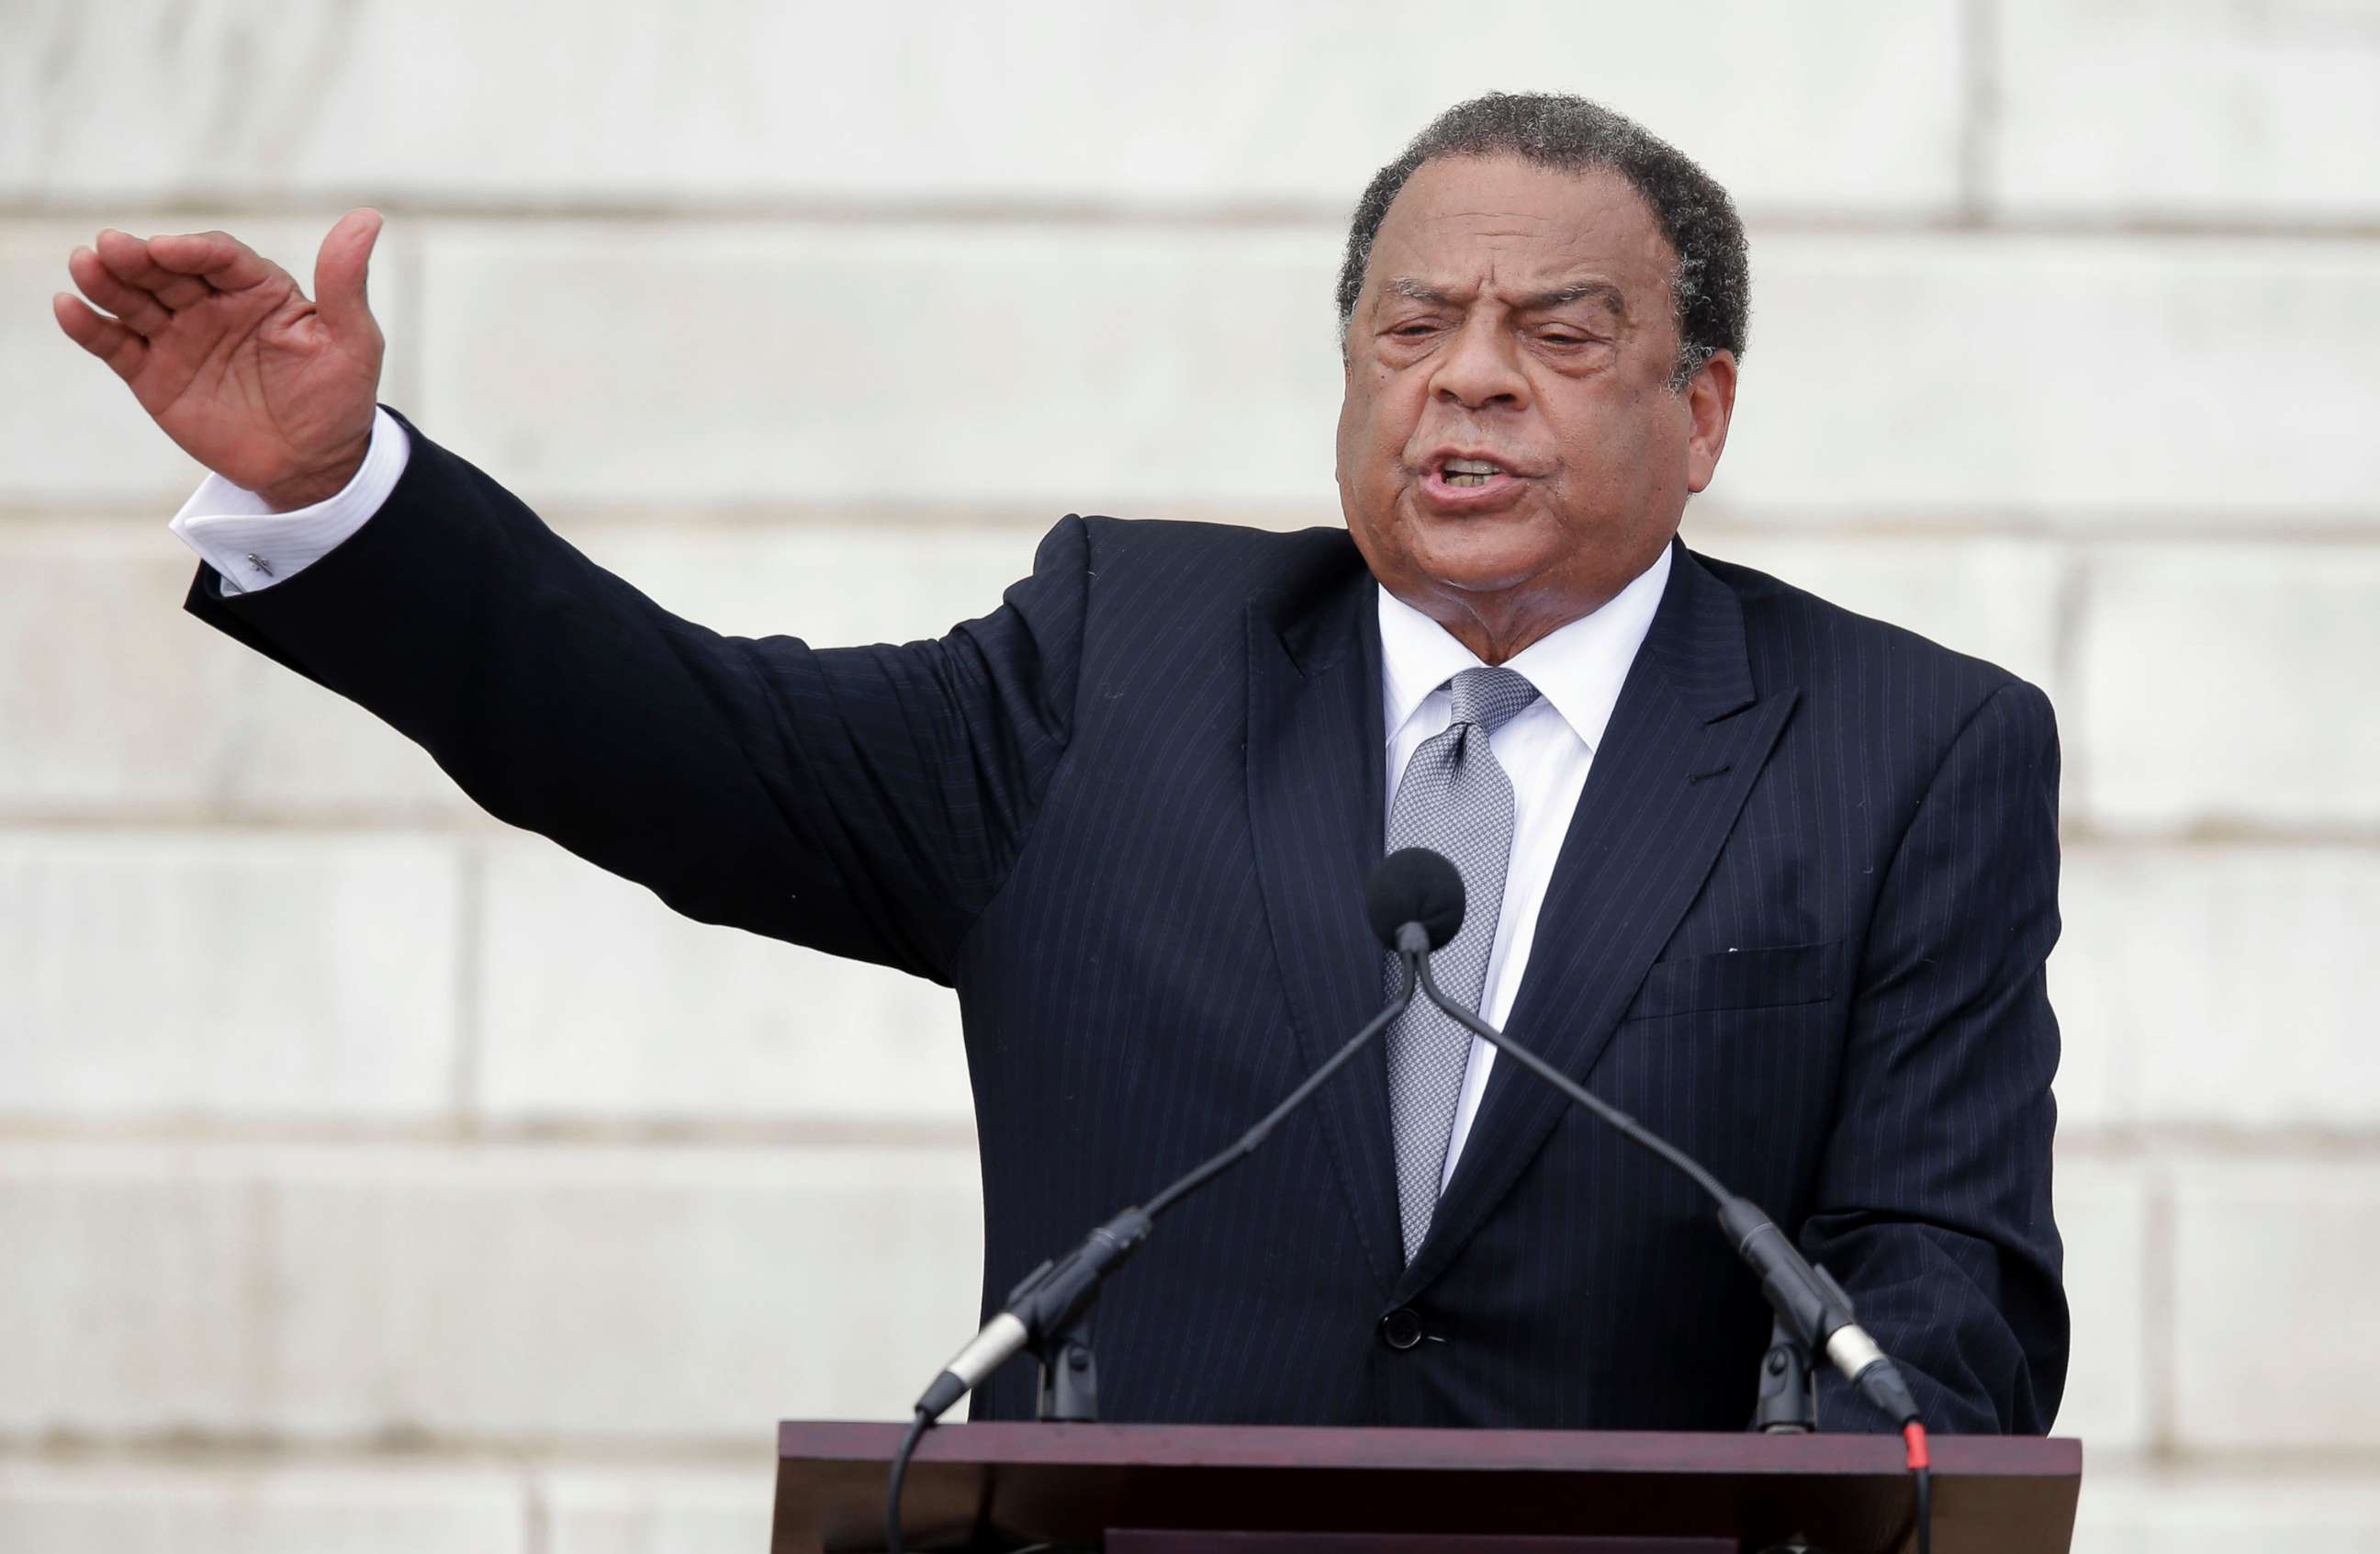 PHOTO: Former United Nations Ambassador Andrew Young speaks at the Let Freedom Ring ceremony at the Lincoln Memorial in Washington, D.C., to commemorate the 50th anniversary of the 1963 March on Washington for Jobs and Freedom, Aug. 28, 2013.